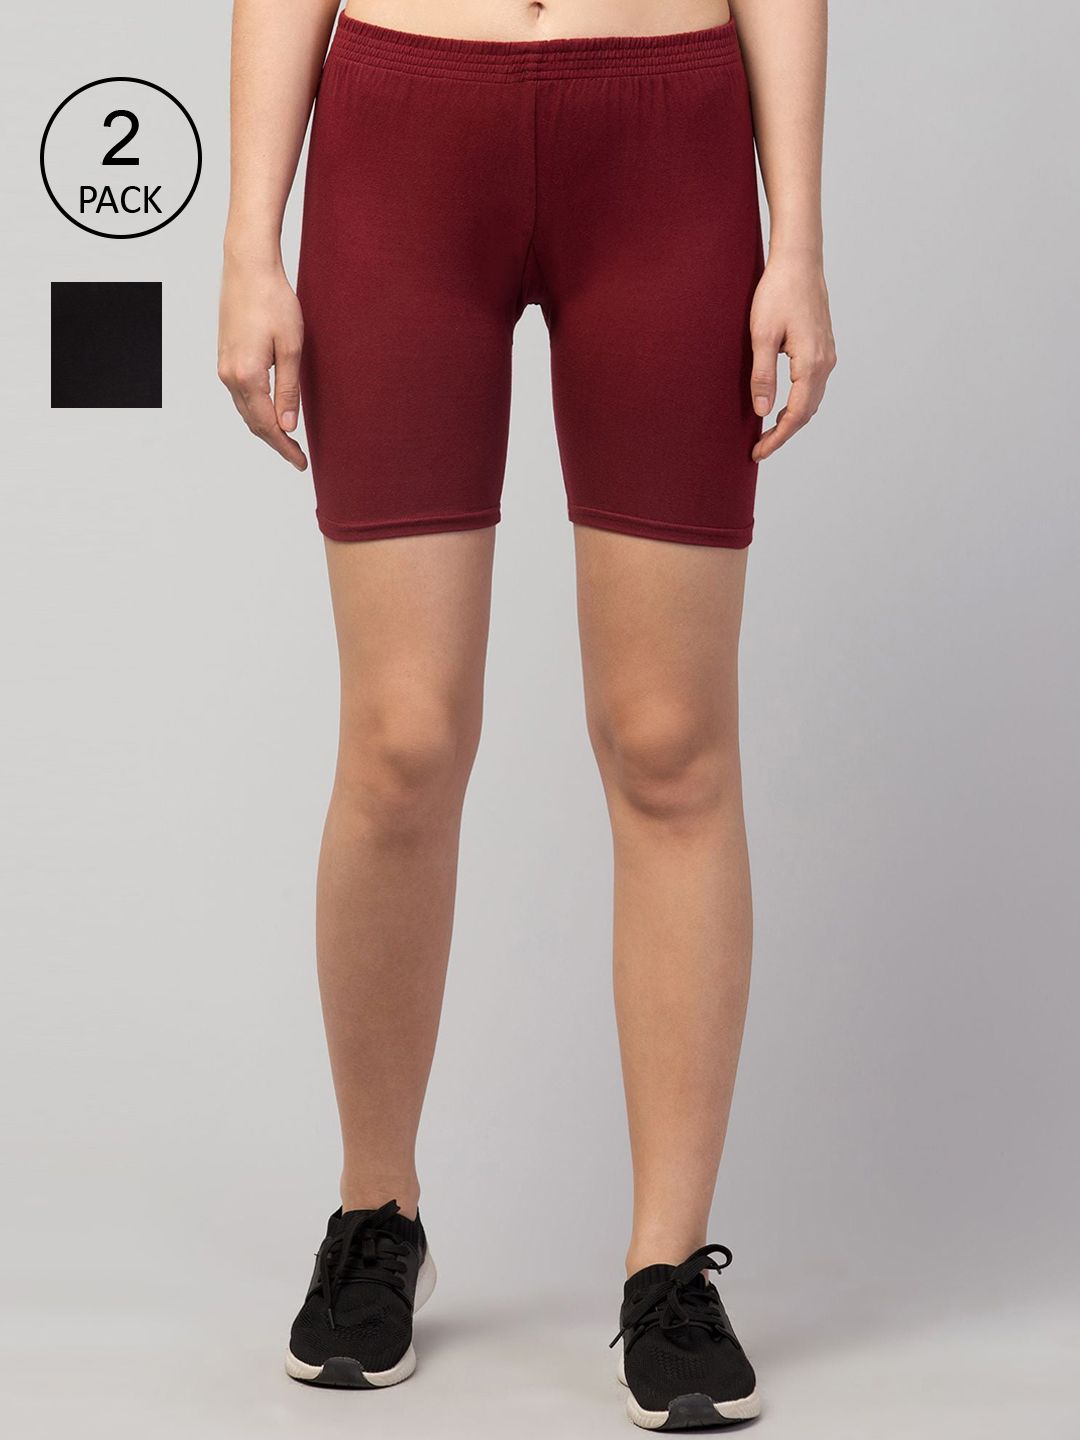 Apraa & Parma Women Maroon Slim Fit Cycling Sports Shorts Price in India